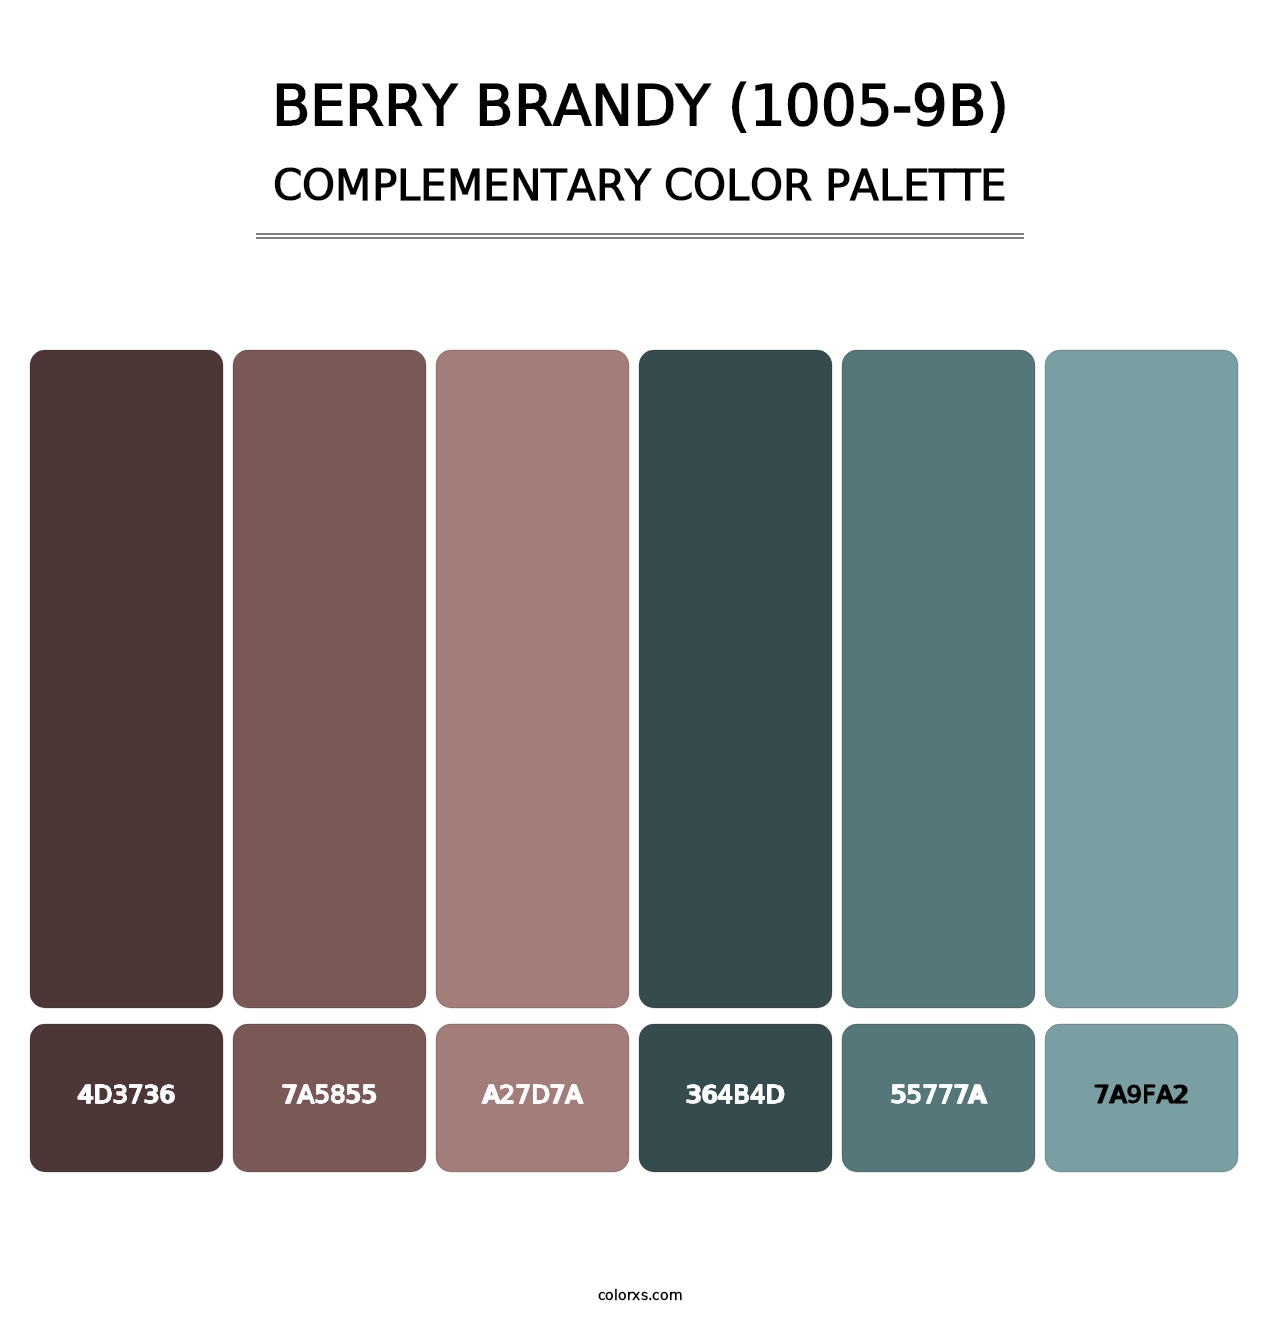 Berry Brandy (1005-9B) - Complementary Color Palette